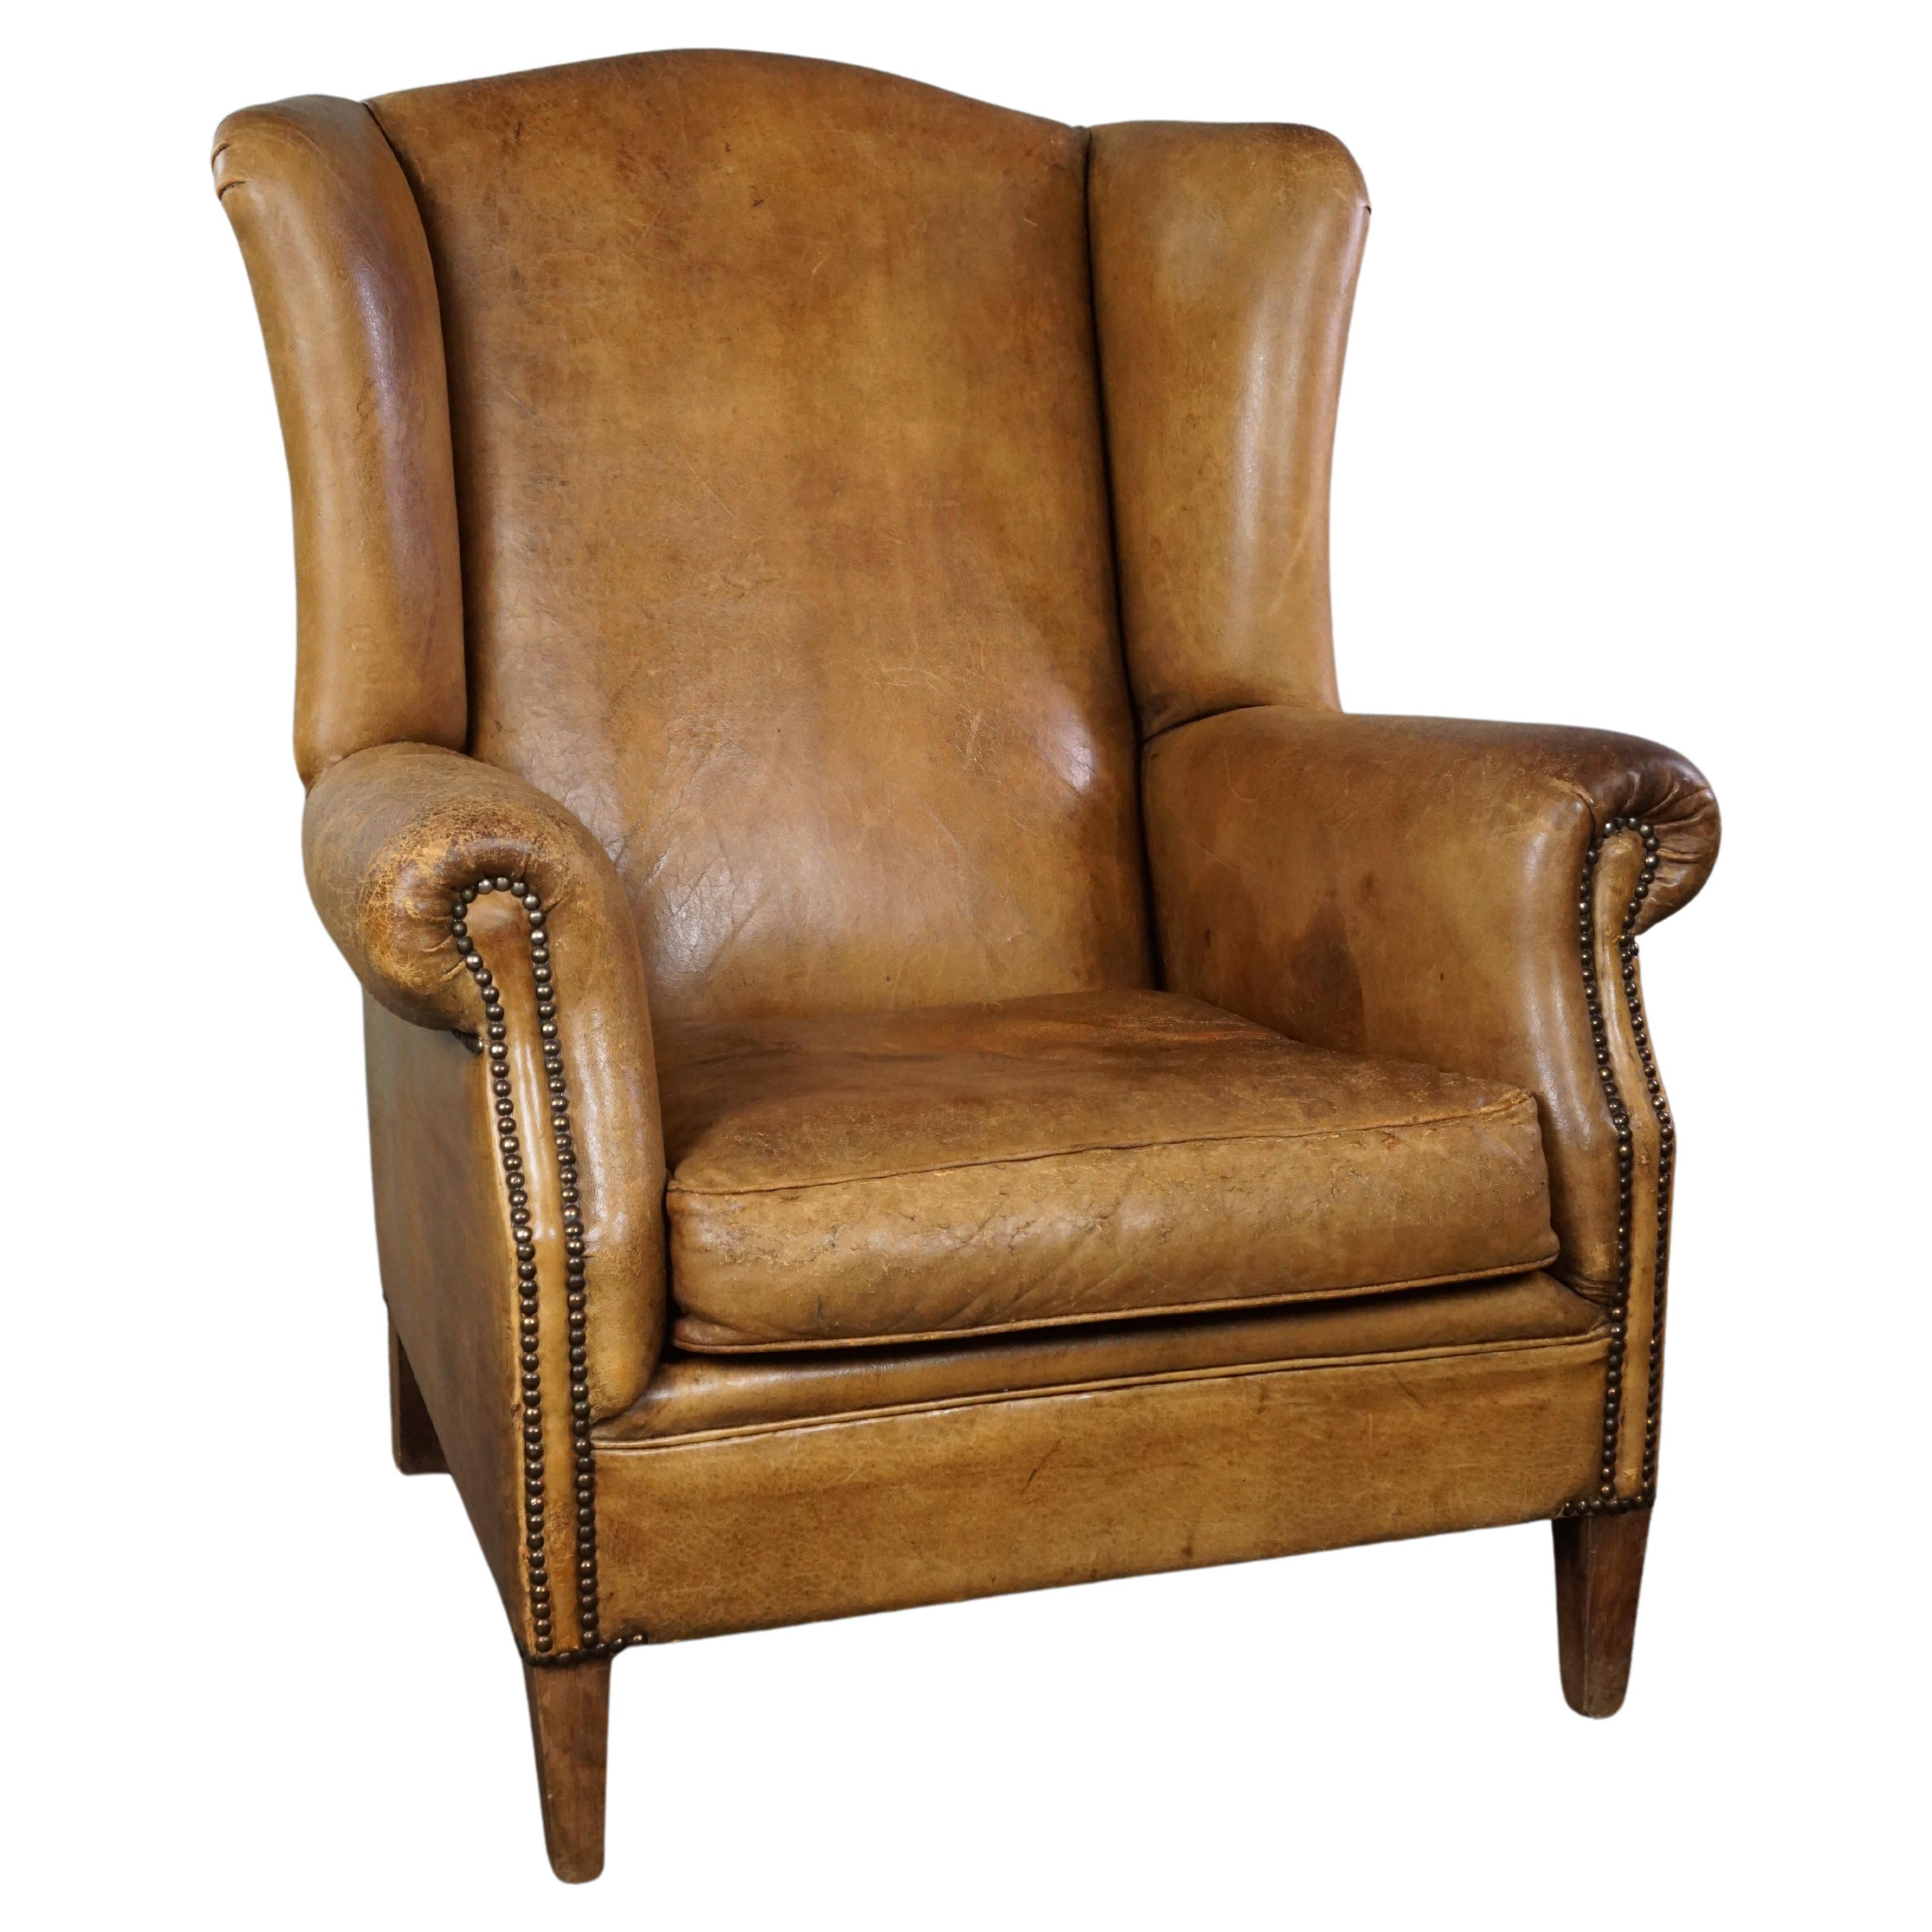 Stylish, lived-in light-colored sheepskin wingback chair For Sale